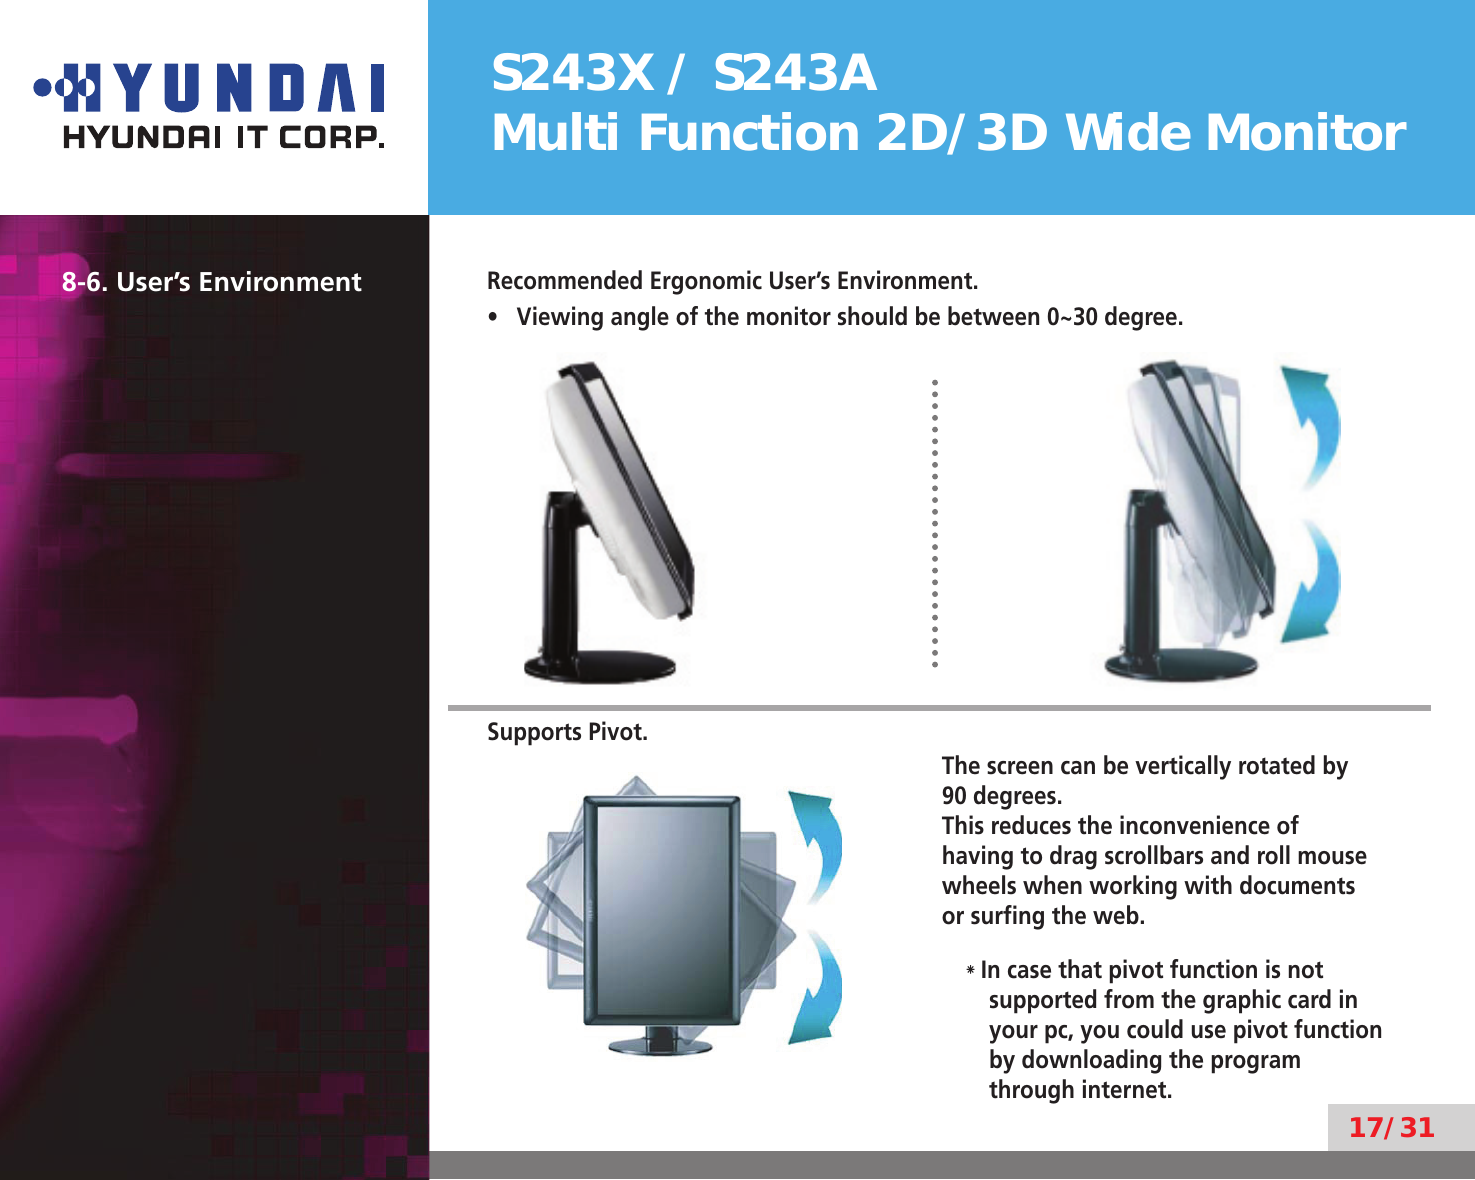 S243X / S243AMulti Function 2D/3D Wide Monitor17/318-6. User’s EnvironmentRecommended Ergonomic User’s Environment.Viewing angle of the monitor should be between 0~30 degree.• Supports Pivot.The screen can be vertically rotated by  90 degrees.This reduces the inconvenience of  having to drag scrollbars and roll mouse wheels when working with documents  or surﬁng the web.* In case that pivot function is not  supported from the graphic card in  your pc, you could use pivot function  by downloading the program  through internet.